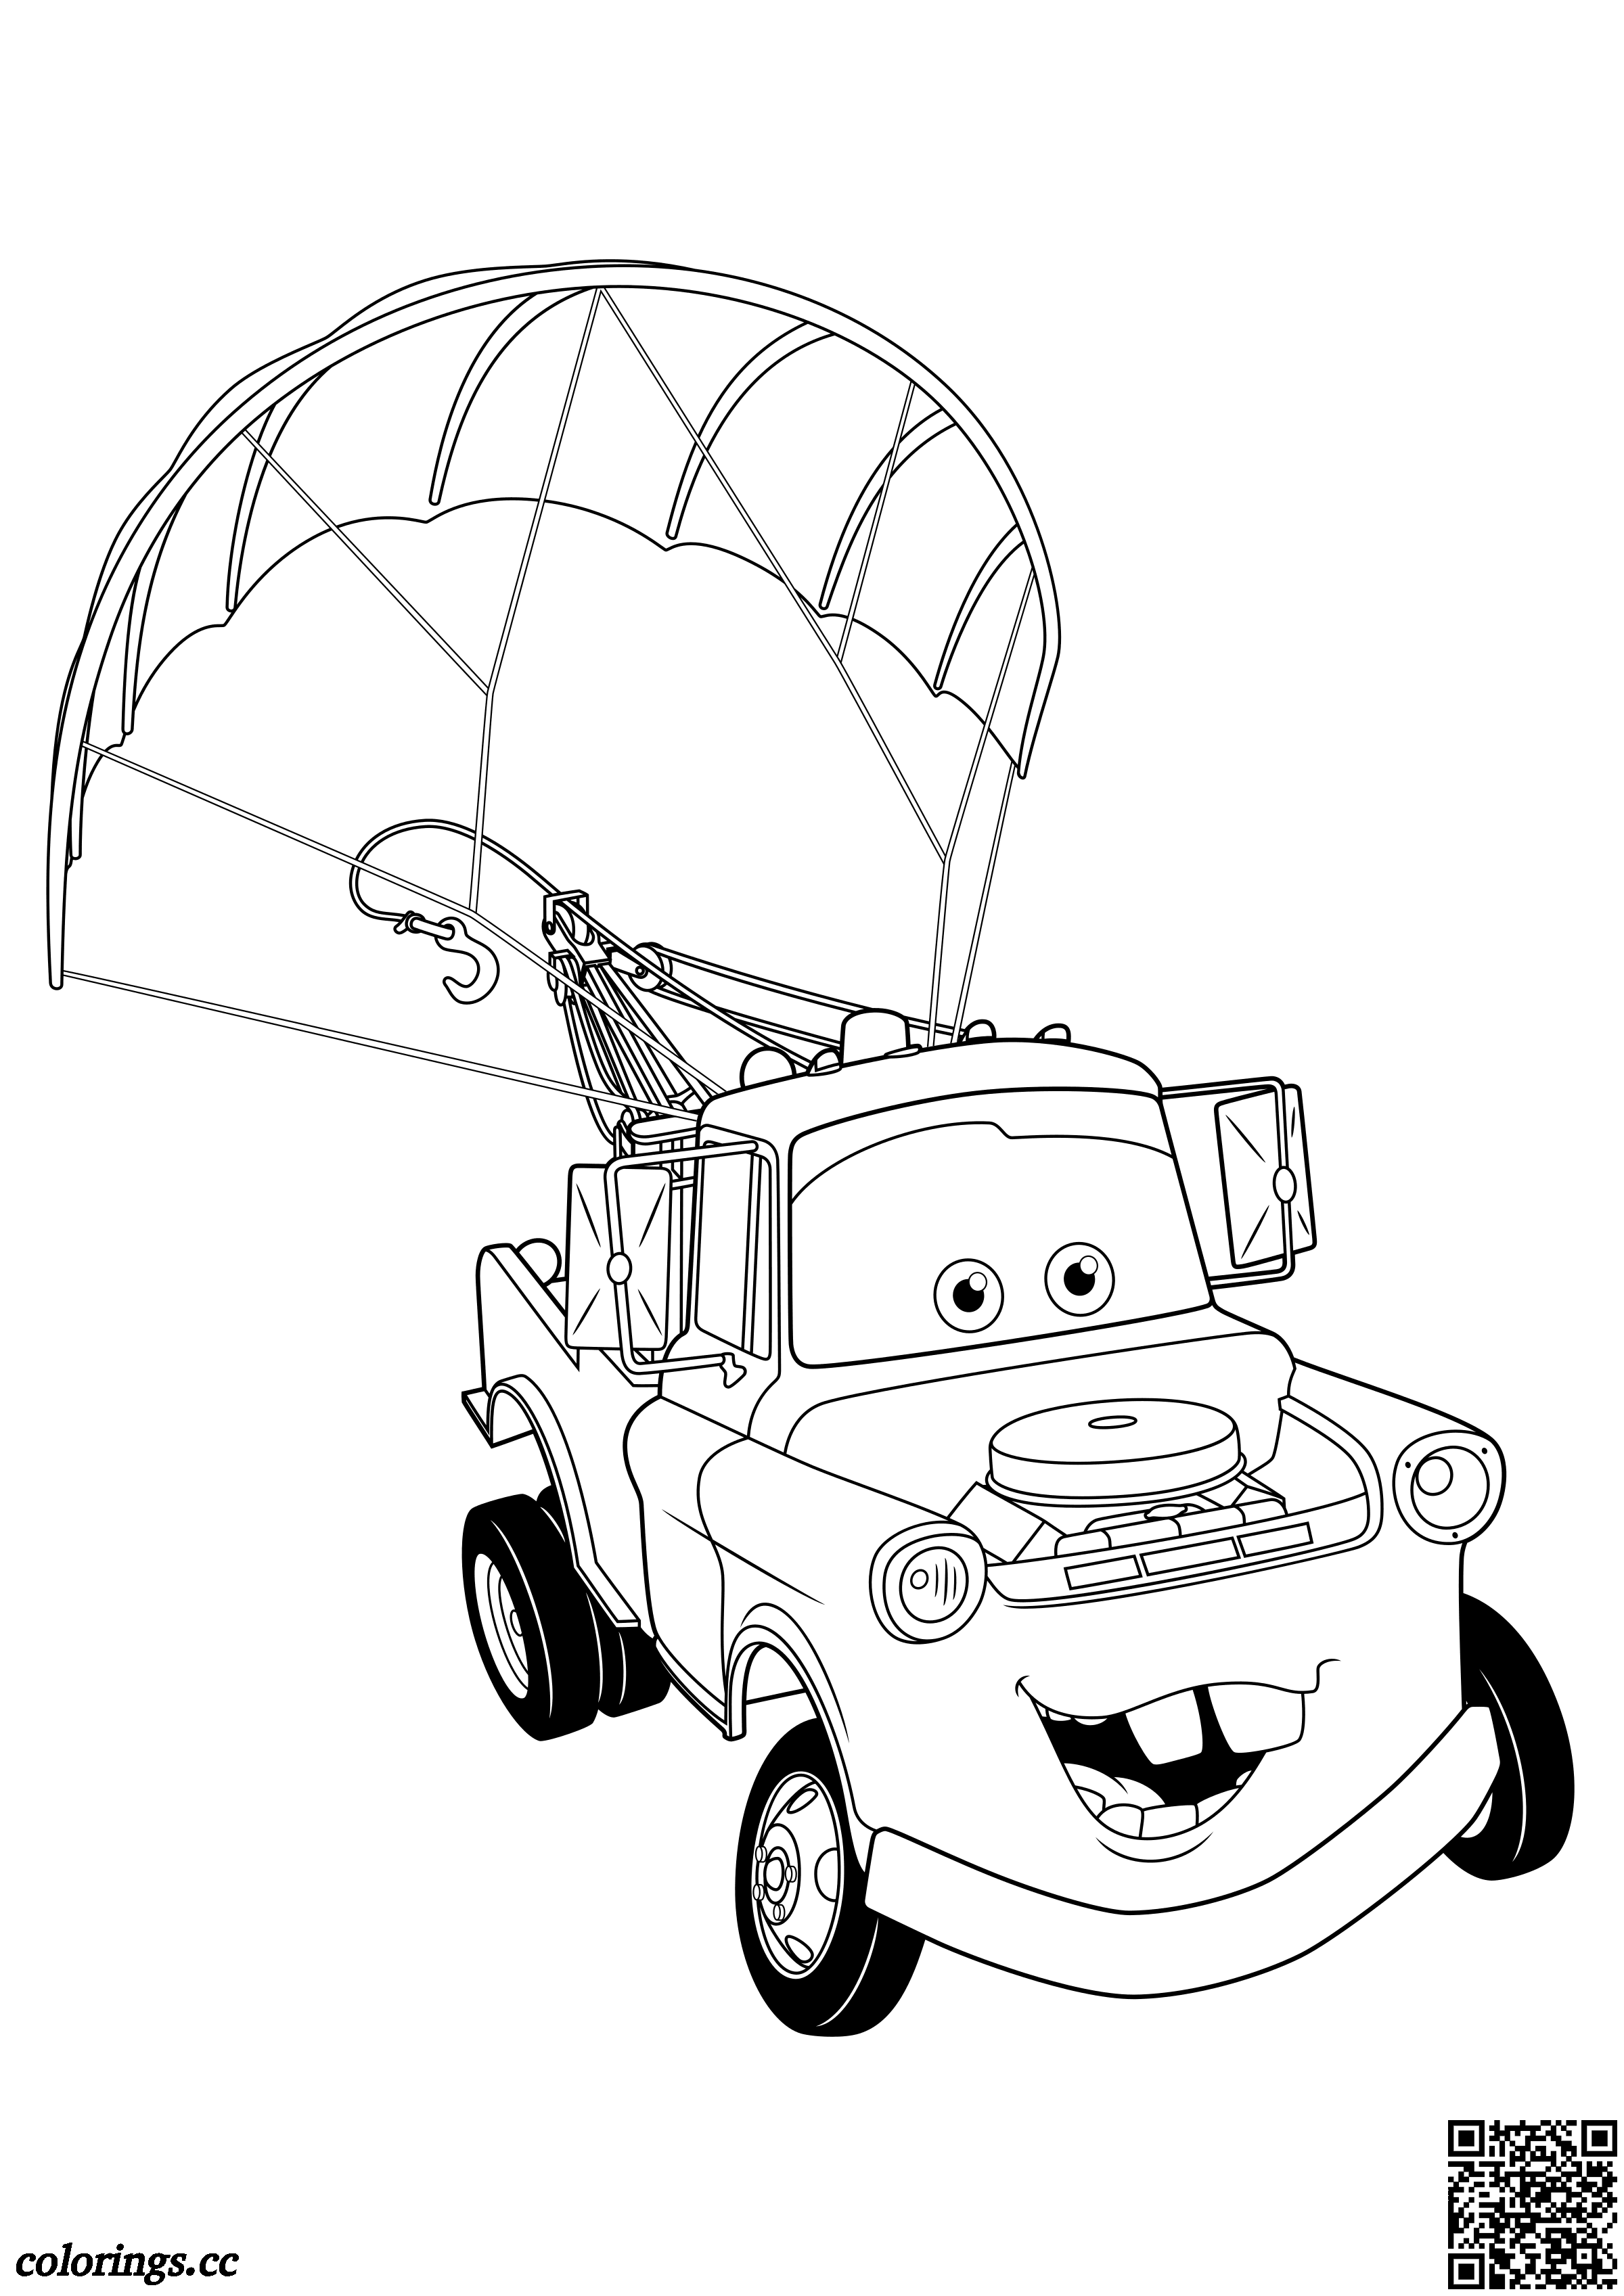 Master with a parachute coloring pages, cars 20 coloring pages ...